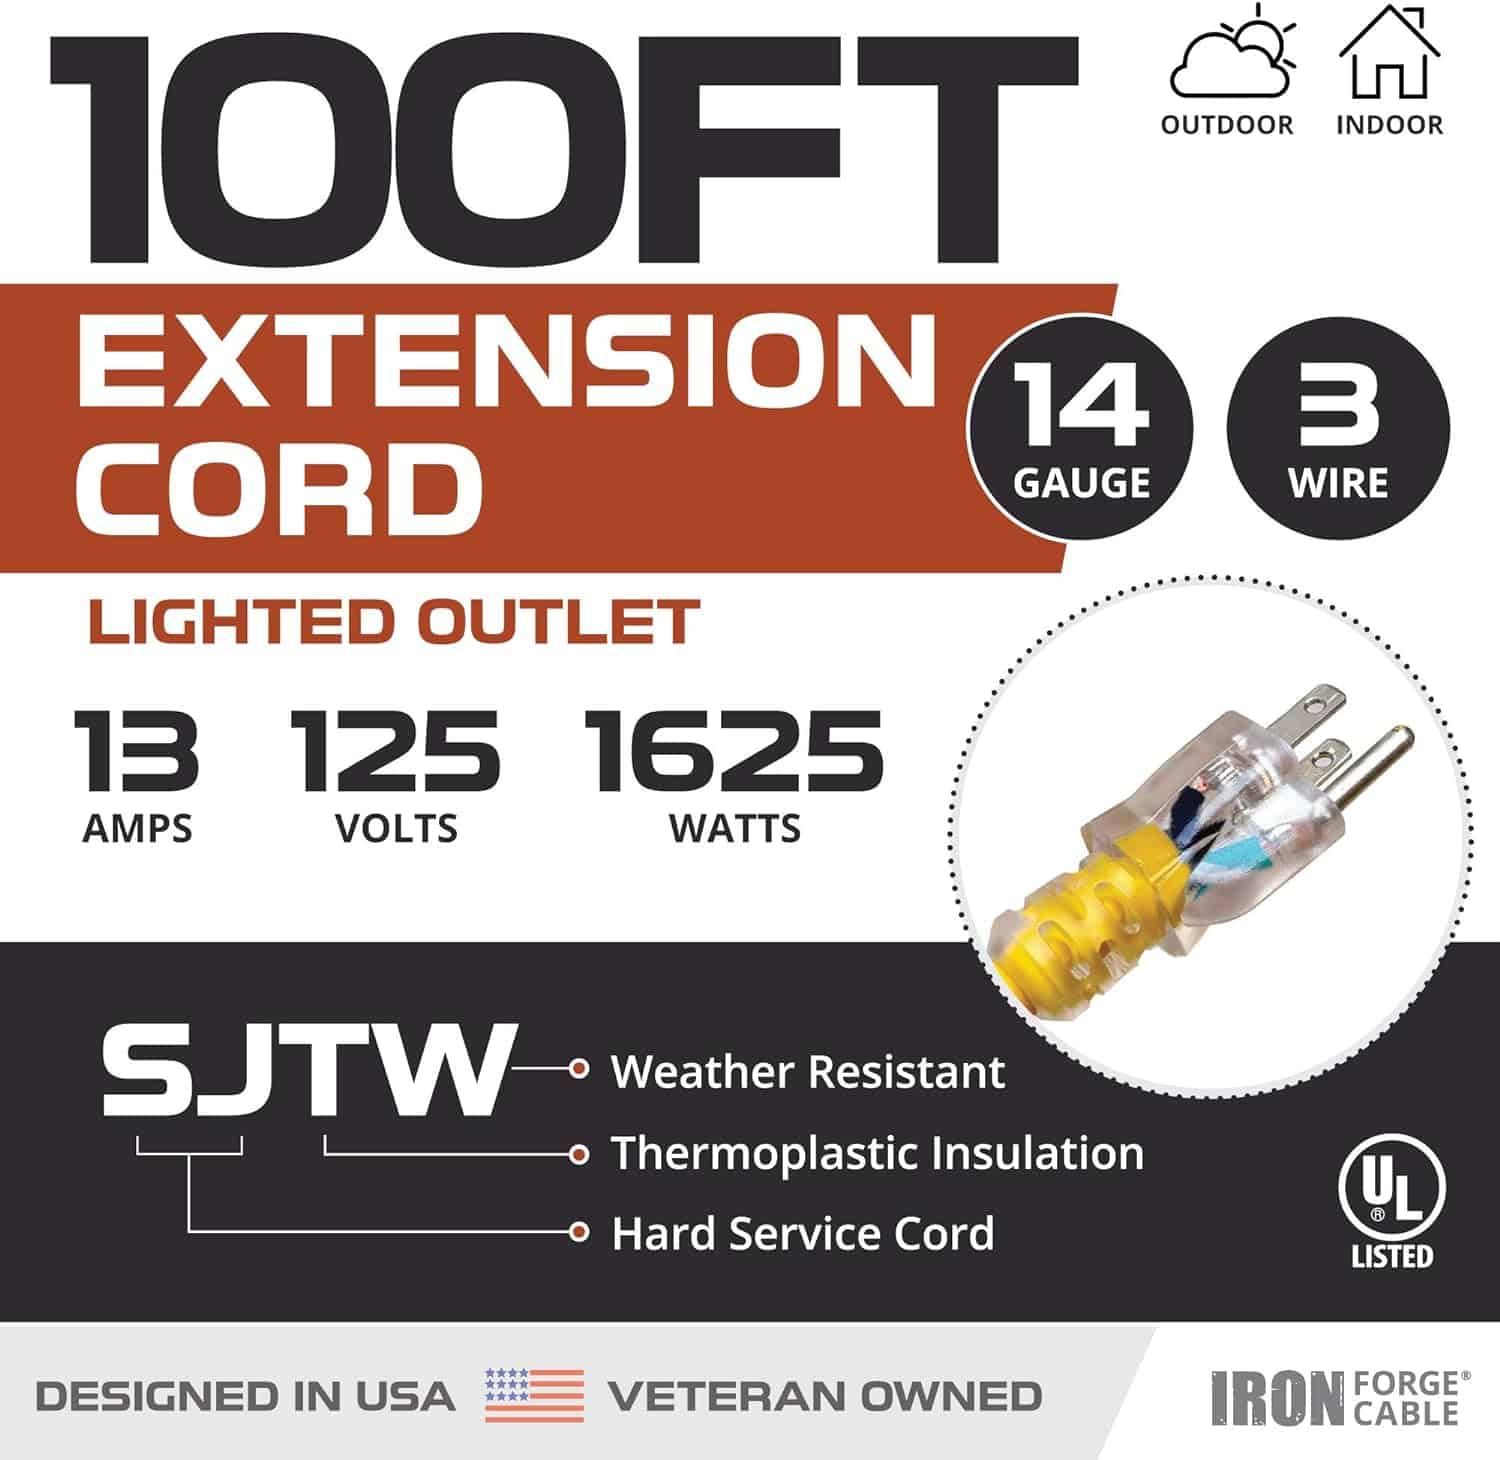 Iron-Forge-Cable-14-Gauge-Extension-Cord-100-Ft-Appliance-Heavy-Duty-Extension-Cord-100-Foot-3-Prong-Lighted-Plug-14-3-Weatherproof-Yellow-Outdoor-Electrical-Cable-SJTW-13-Amp-US-Veteran-Owned